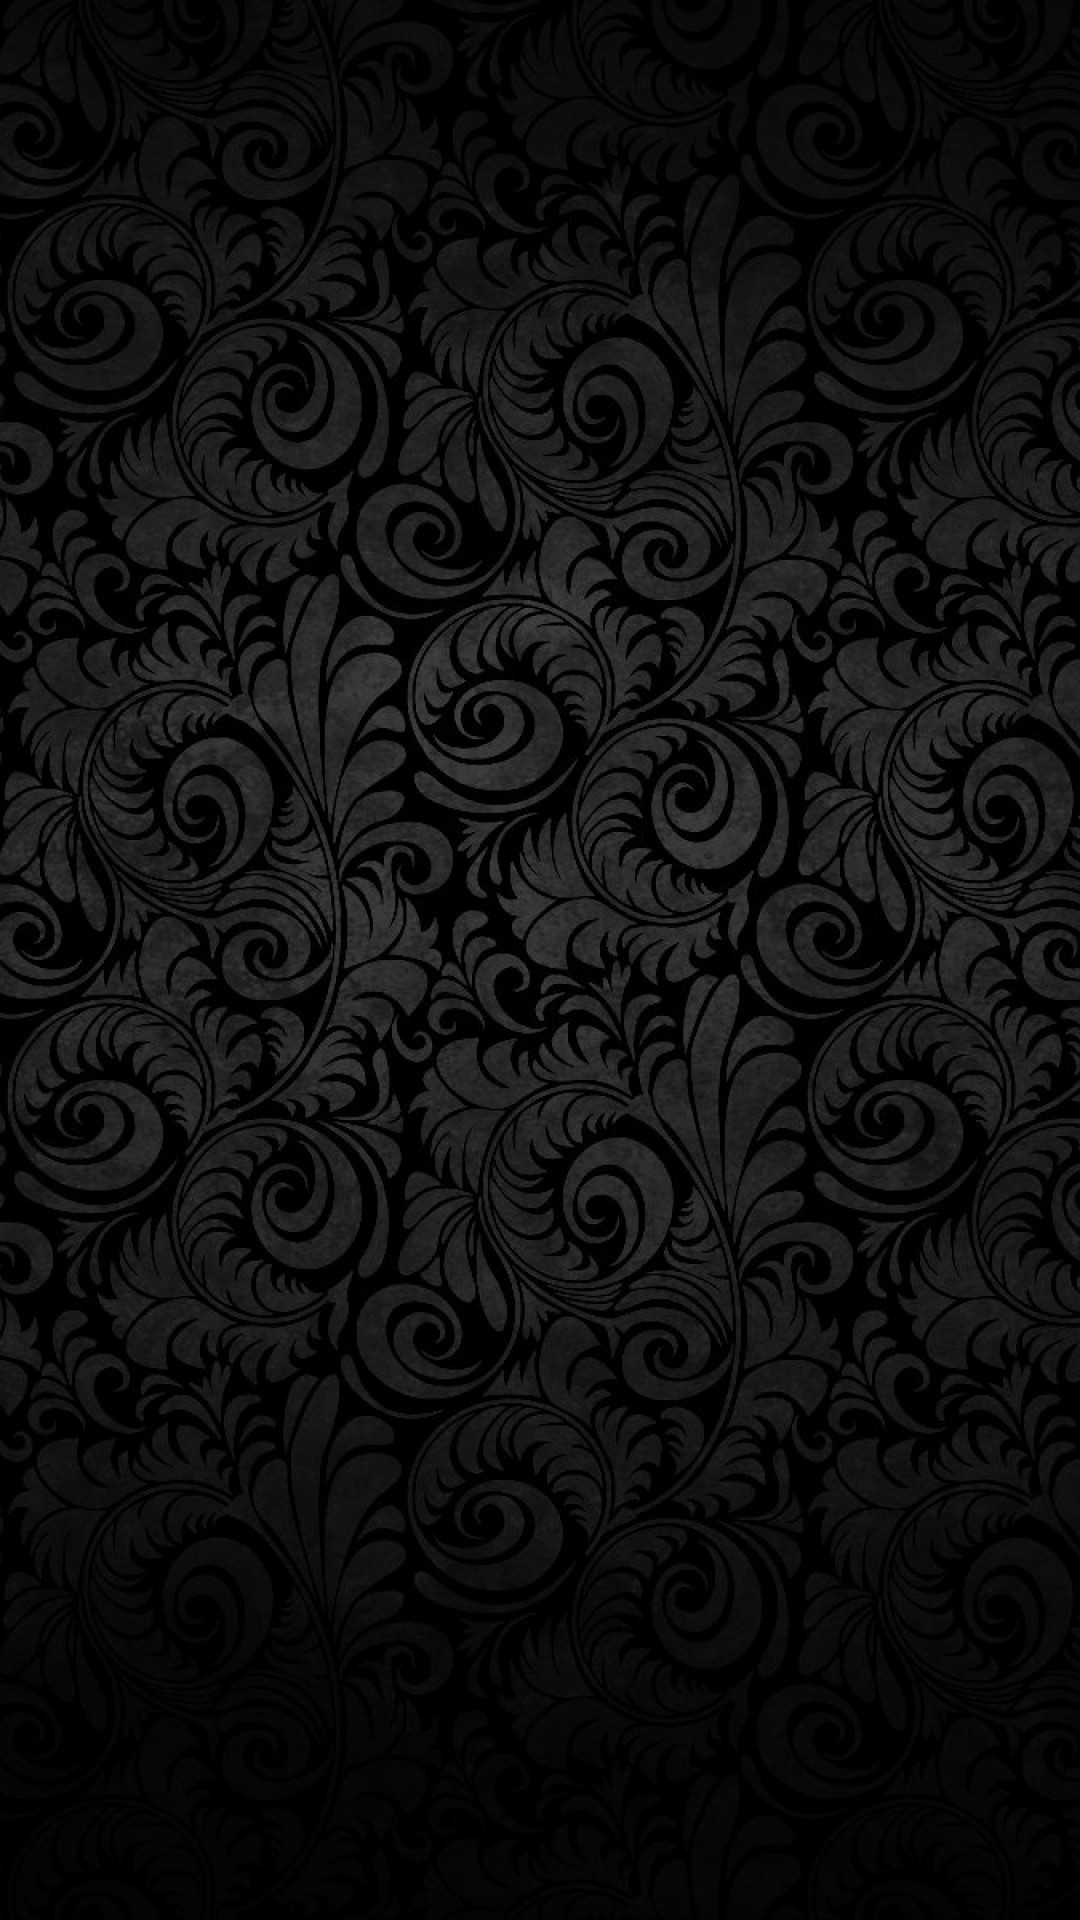 1080x1920 iPhone 6s Black Flower Abstract Wallpaper HDiPhone 6s Black Flower Abstract…